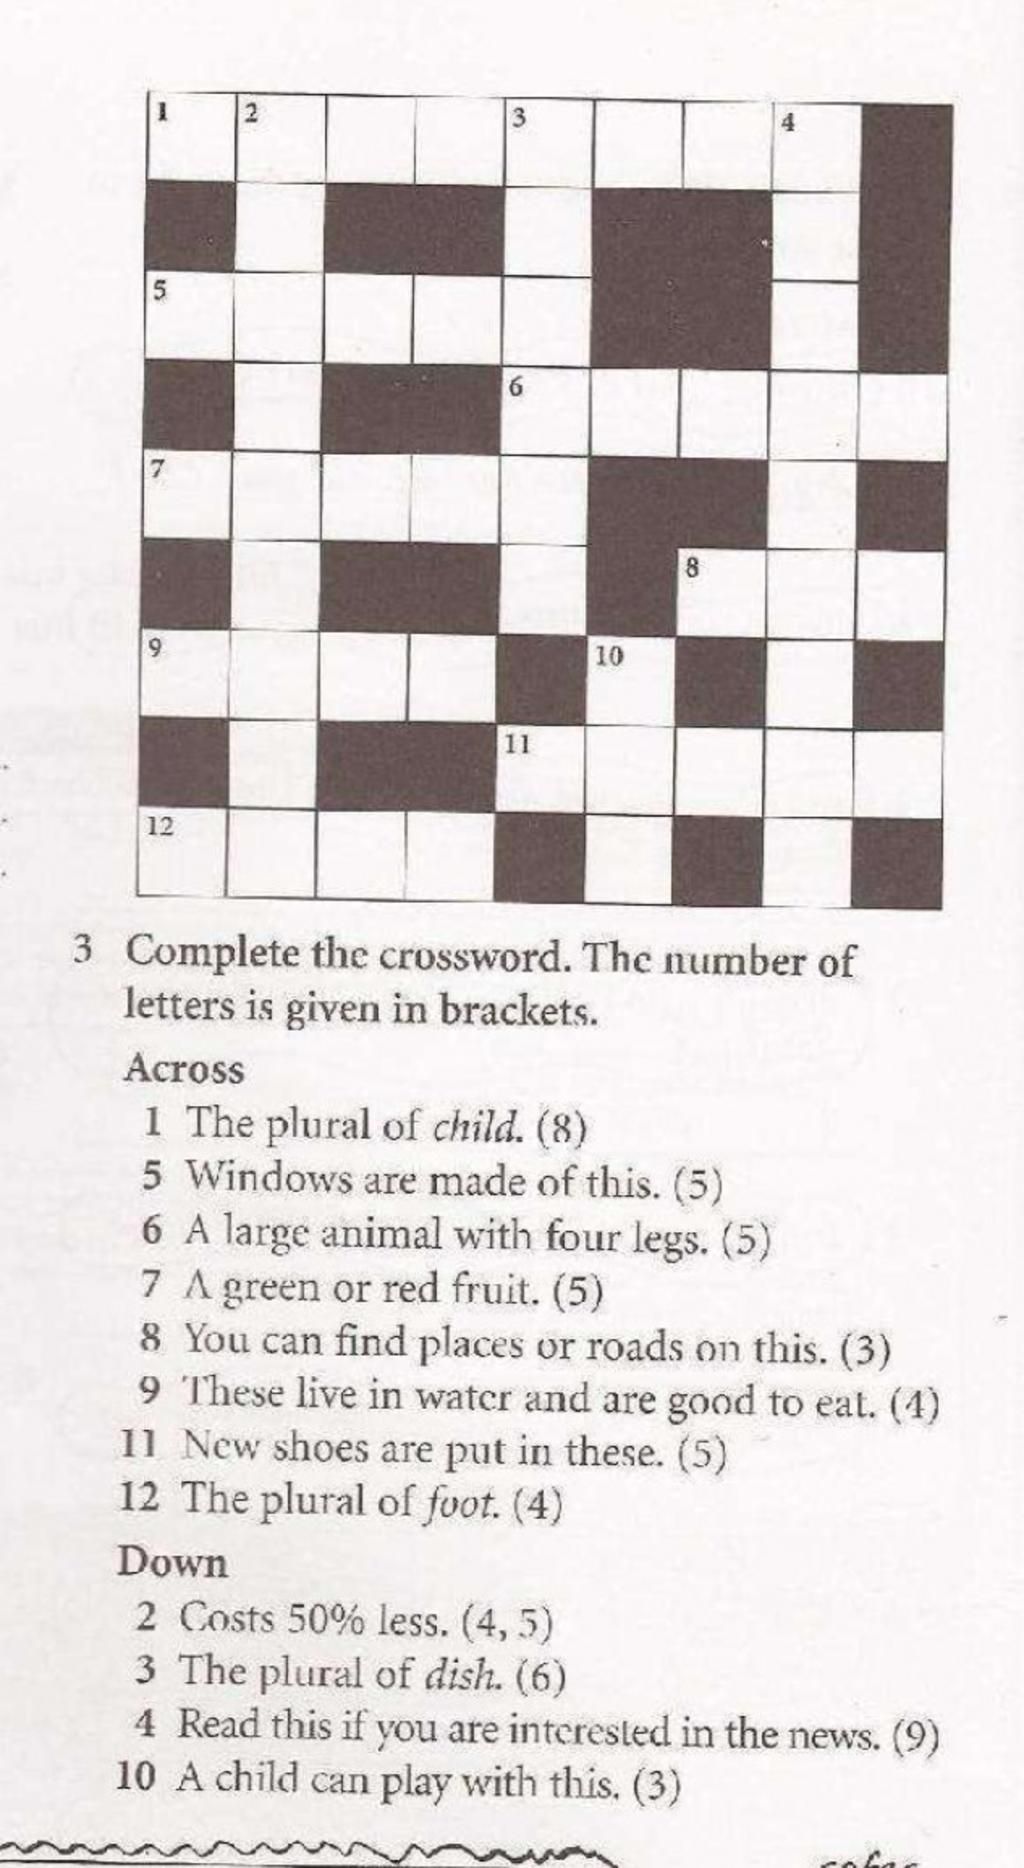 3 4 6. 10 11 12 3 Complete the crossword. The number of letters is given in  brackets. Across 1 The plural of child. (8) 5 Windows are made of this. (5)  6 A